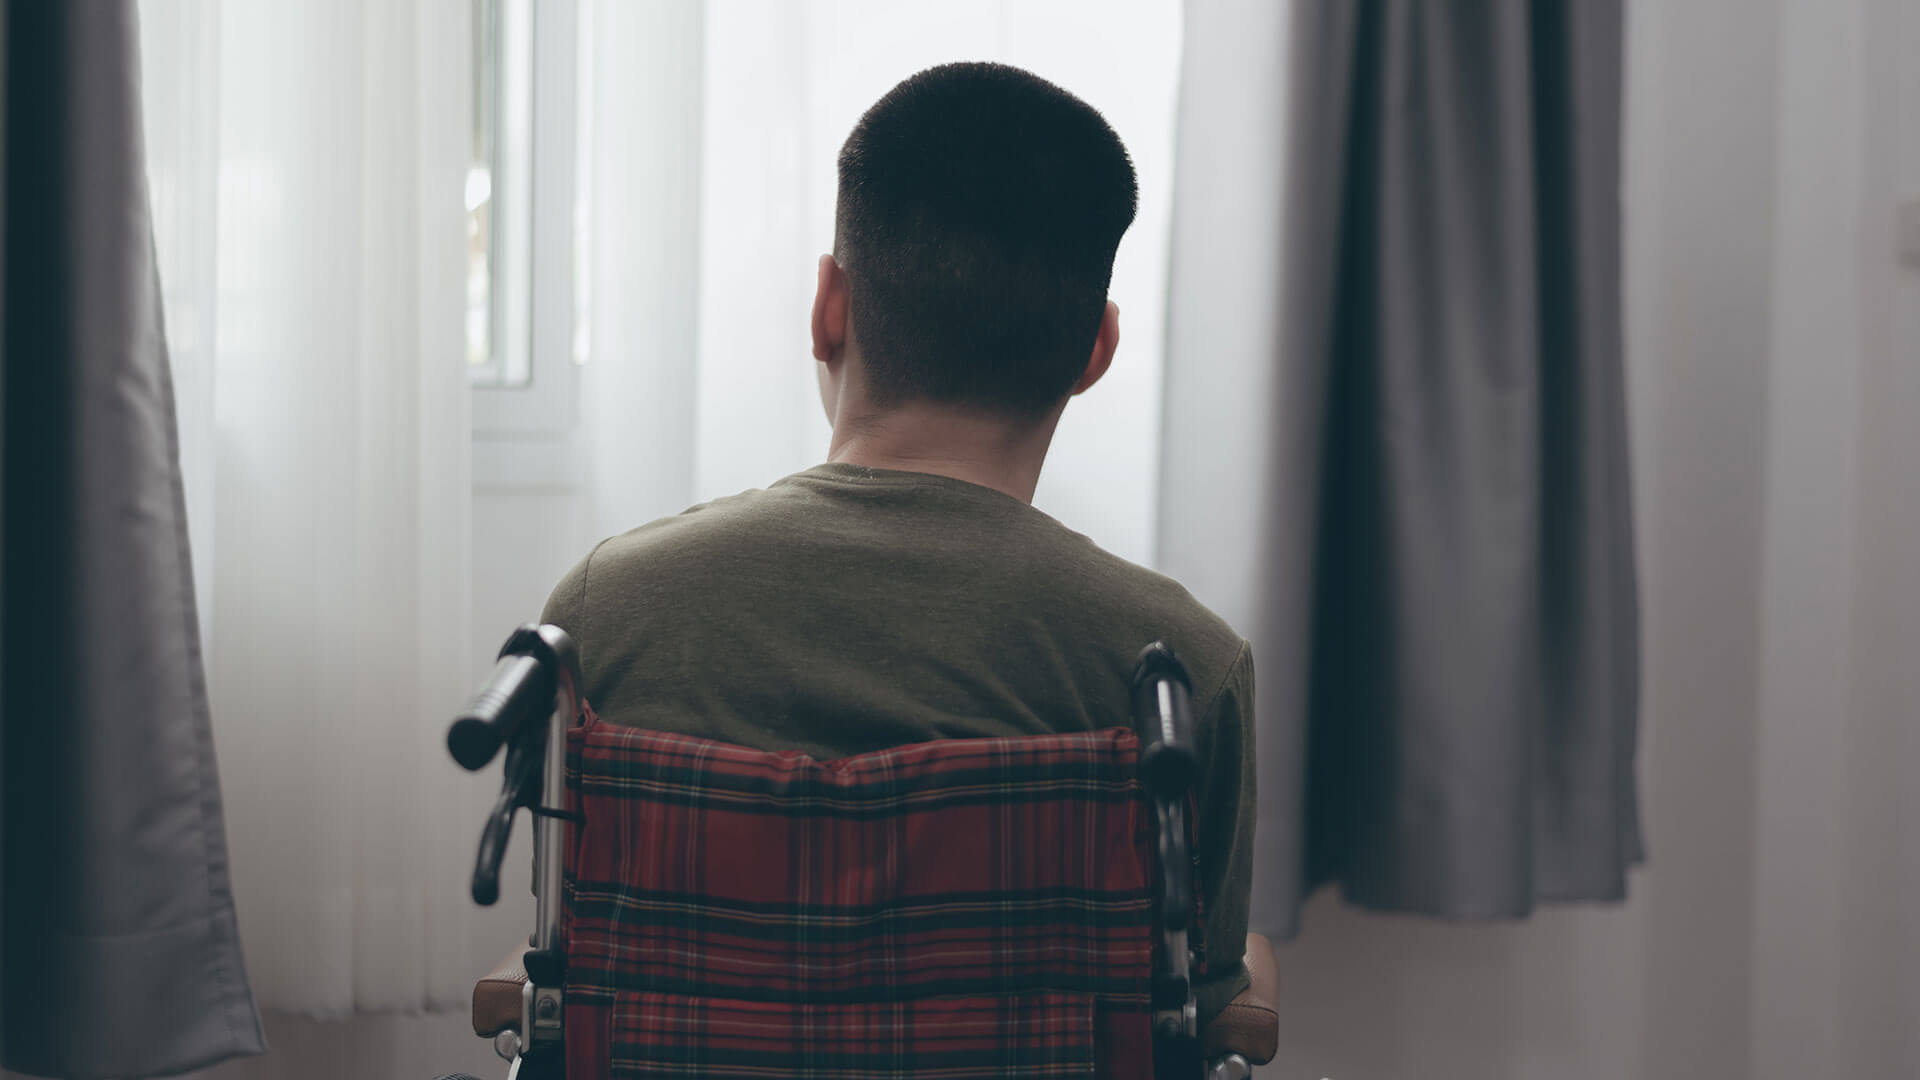 NDIS Review Underway: A man sits in a wheelchair looking out the window.